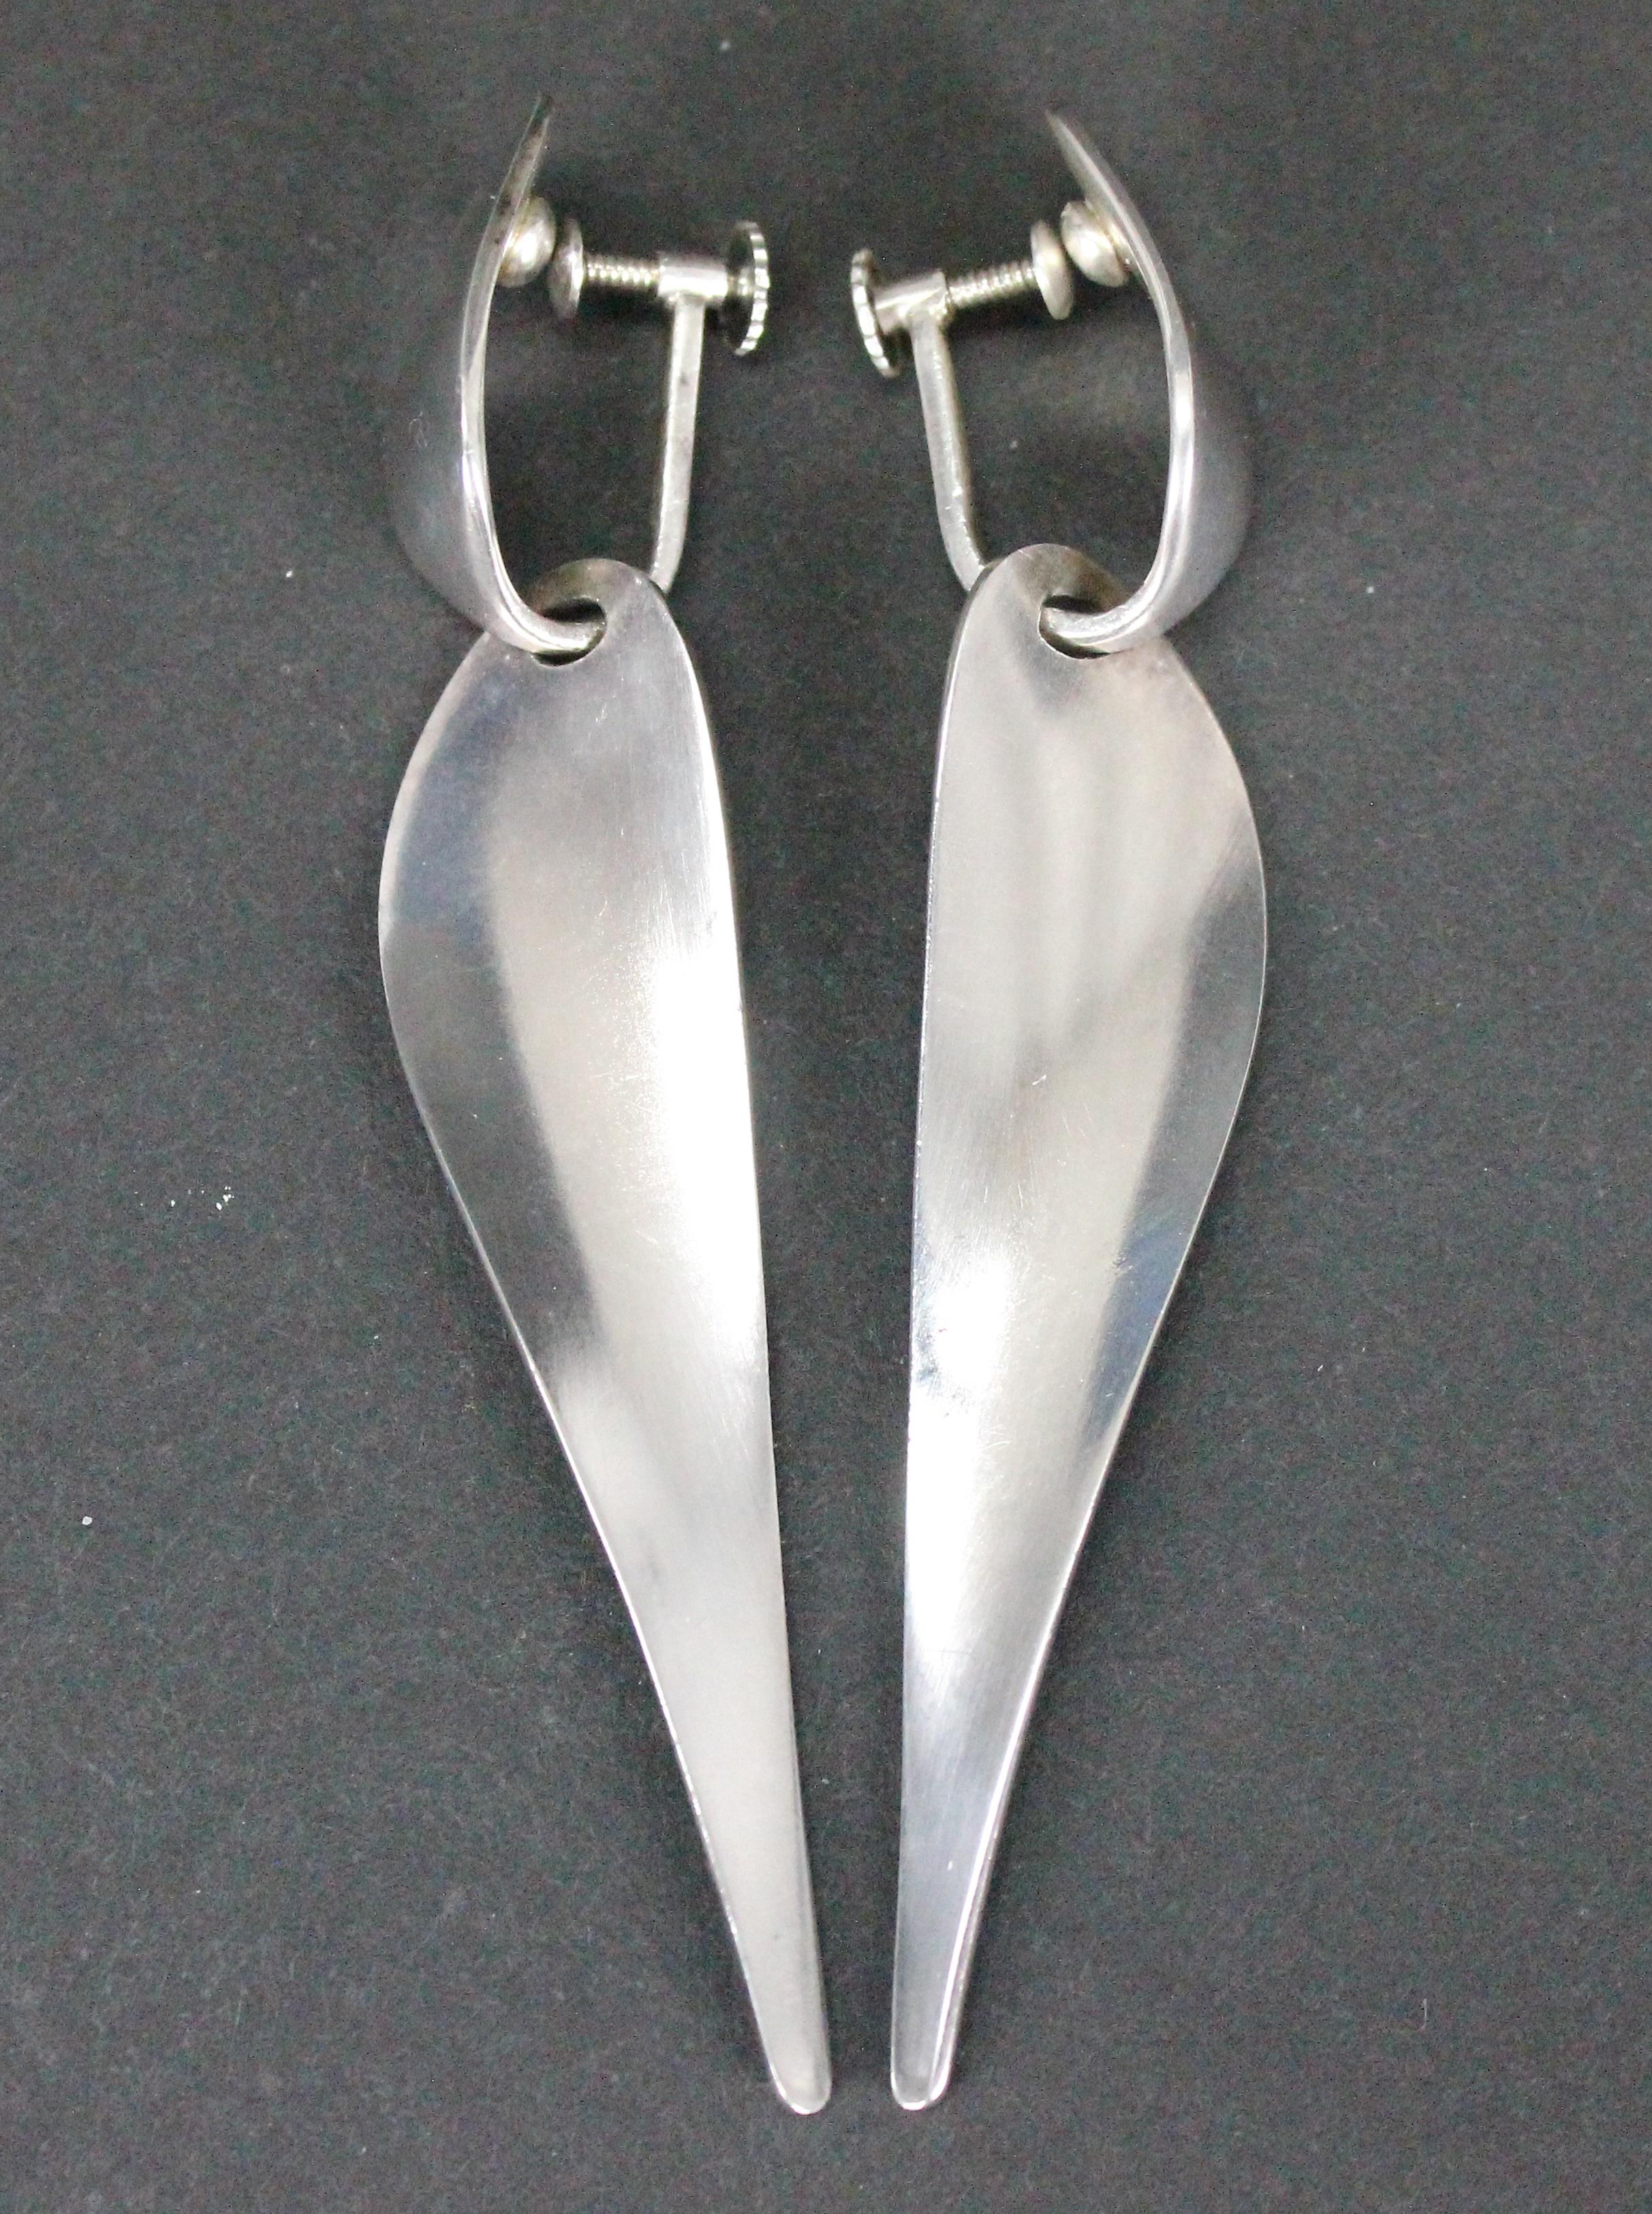 Great pair of earrings designed by legend Nanna Ditzel for Georg Jensen in the 1970s.
Very nice vintage condition.

Nanna Ditzel (1923 - 2005) was one of Denmark’s most accomplished contemporary designers and the first woman to design for the Georg